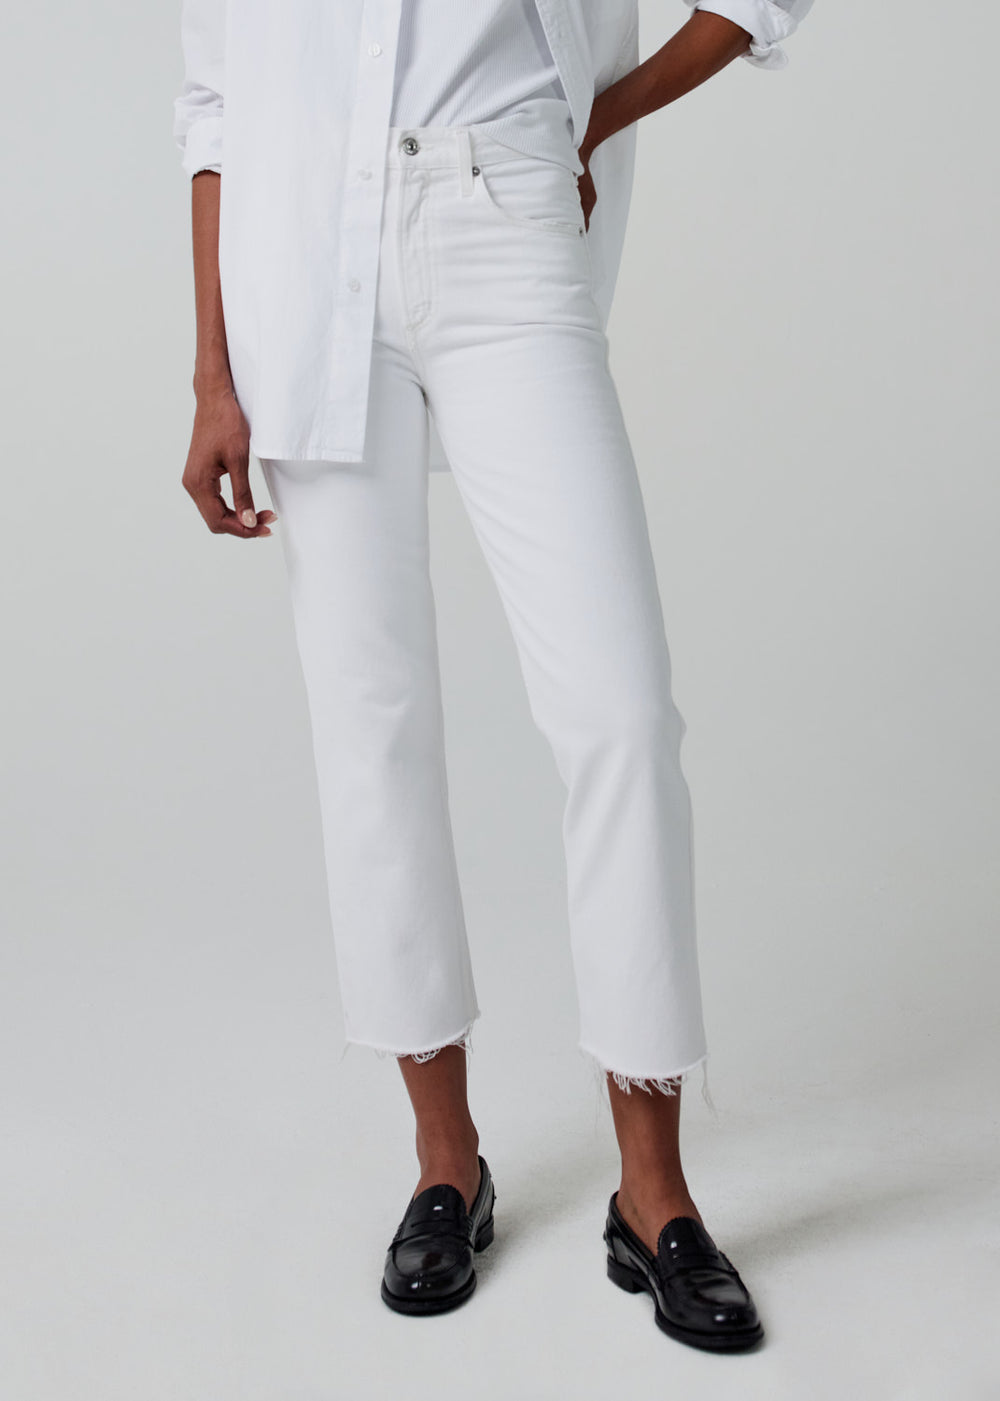 DAPHNE HIGH RISE STOVEPIPE CROP JEAN IN SAIL